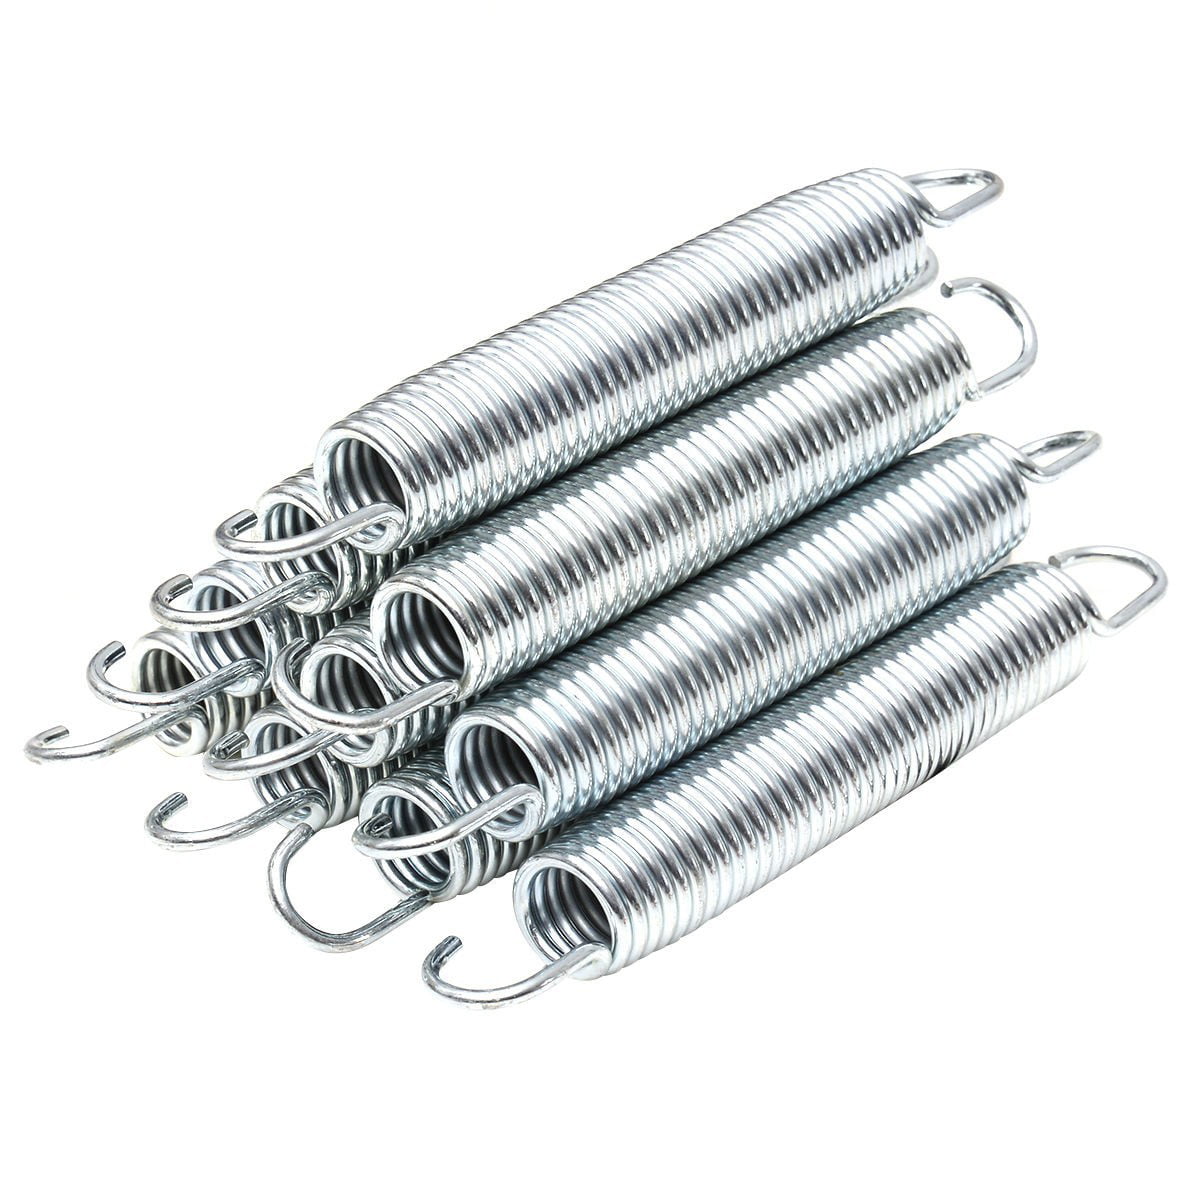 8.5 Trampoline Spring Replacement Heavy-Duty Galvanized 20Pcs 